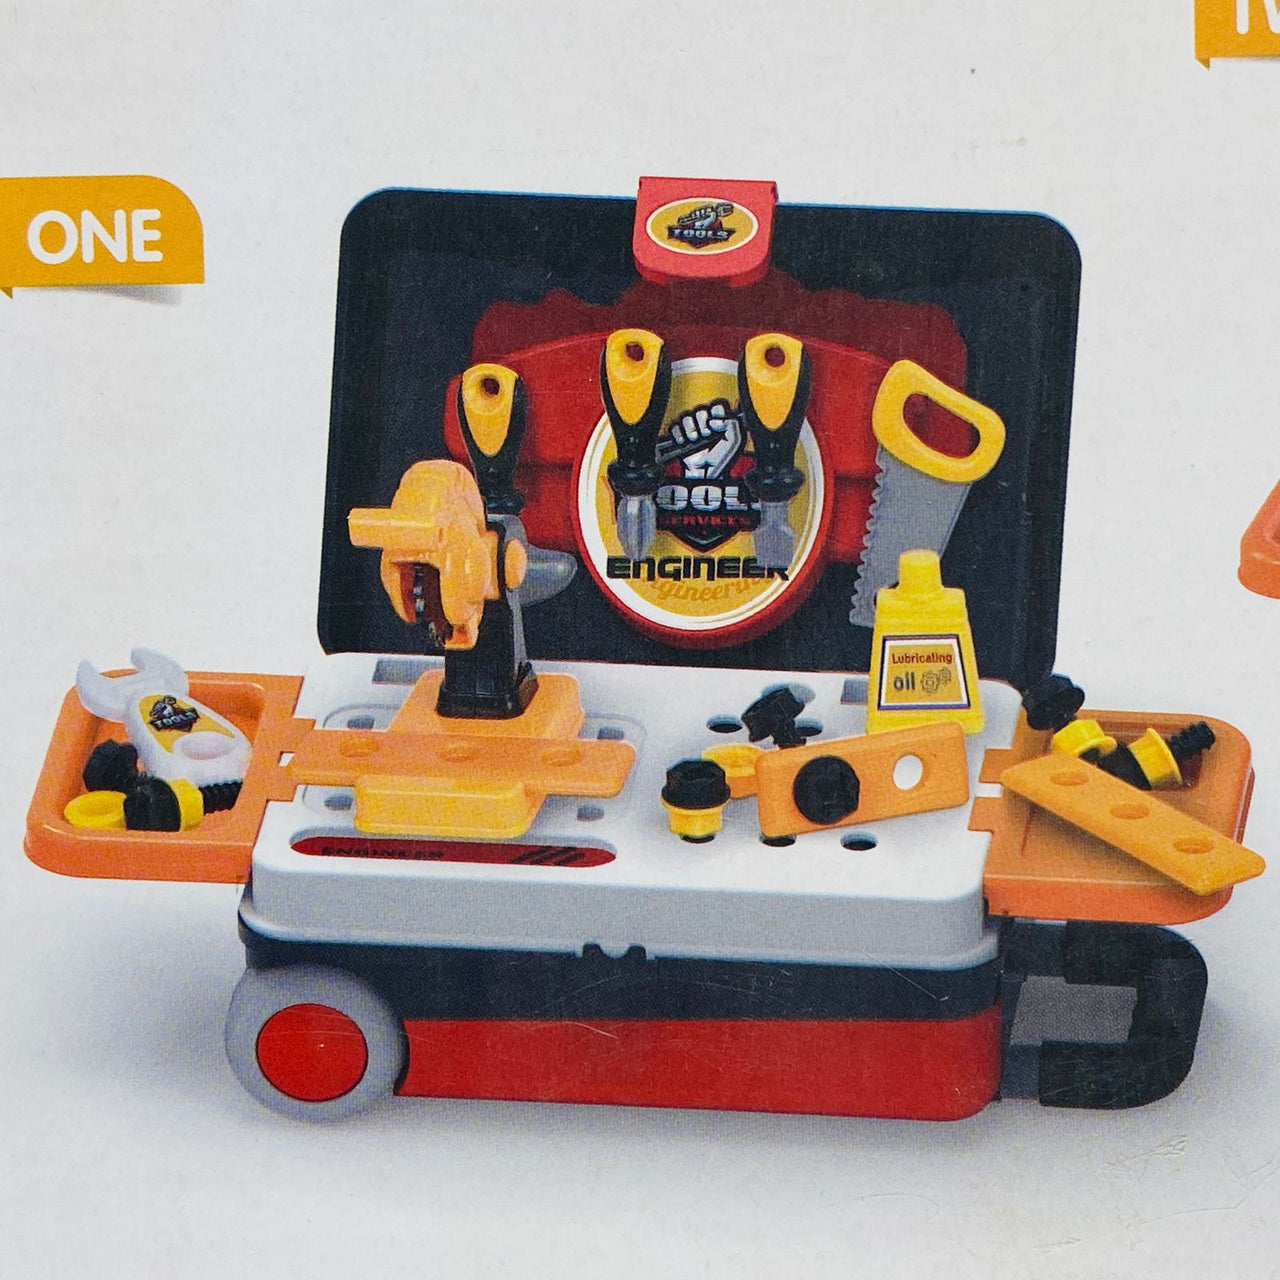 4 in 1 Deluxe Tool Play Set